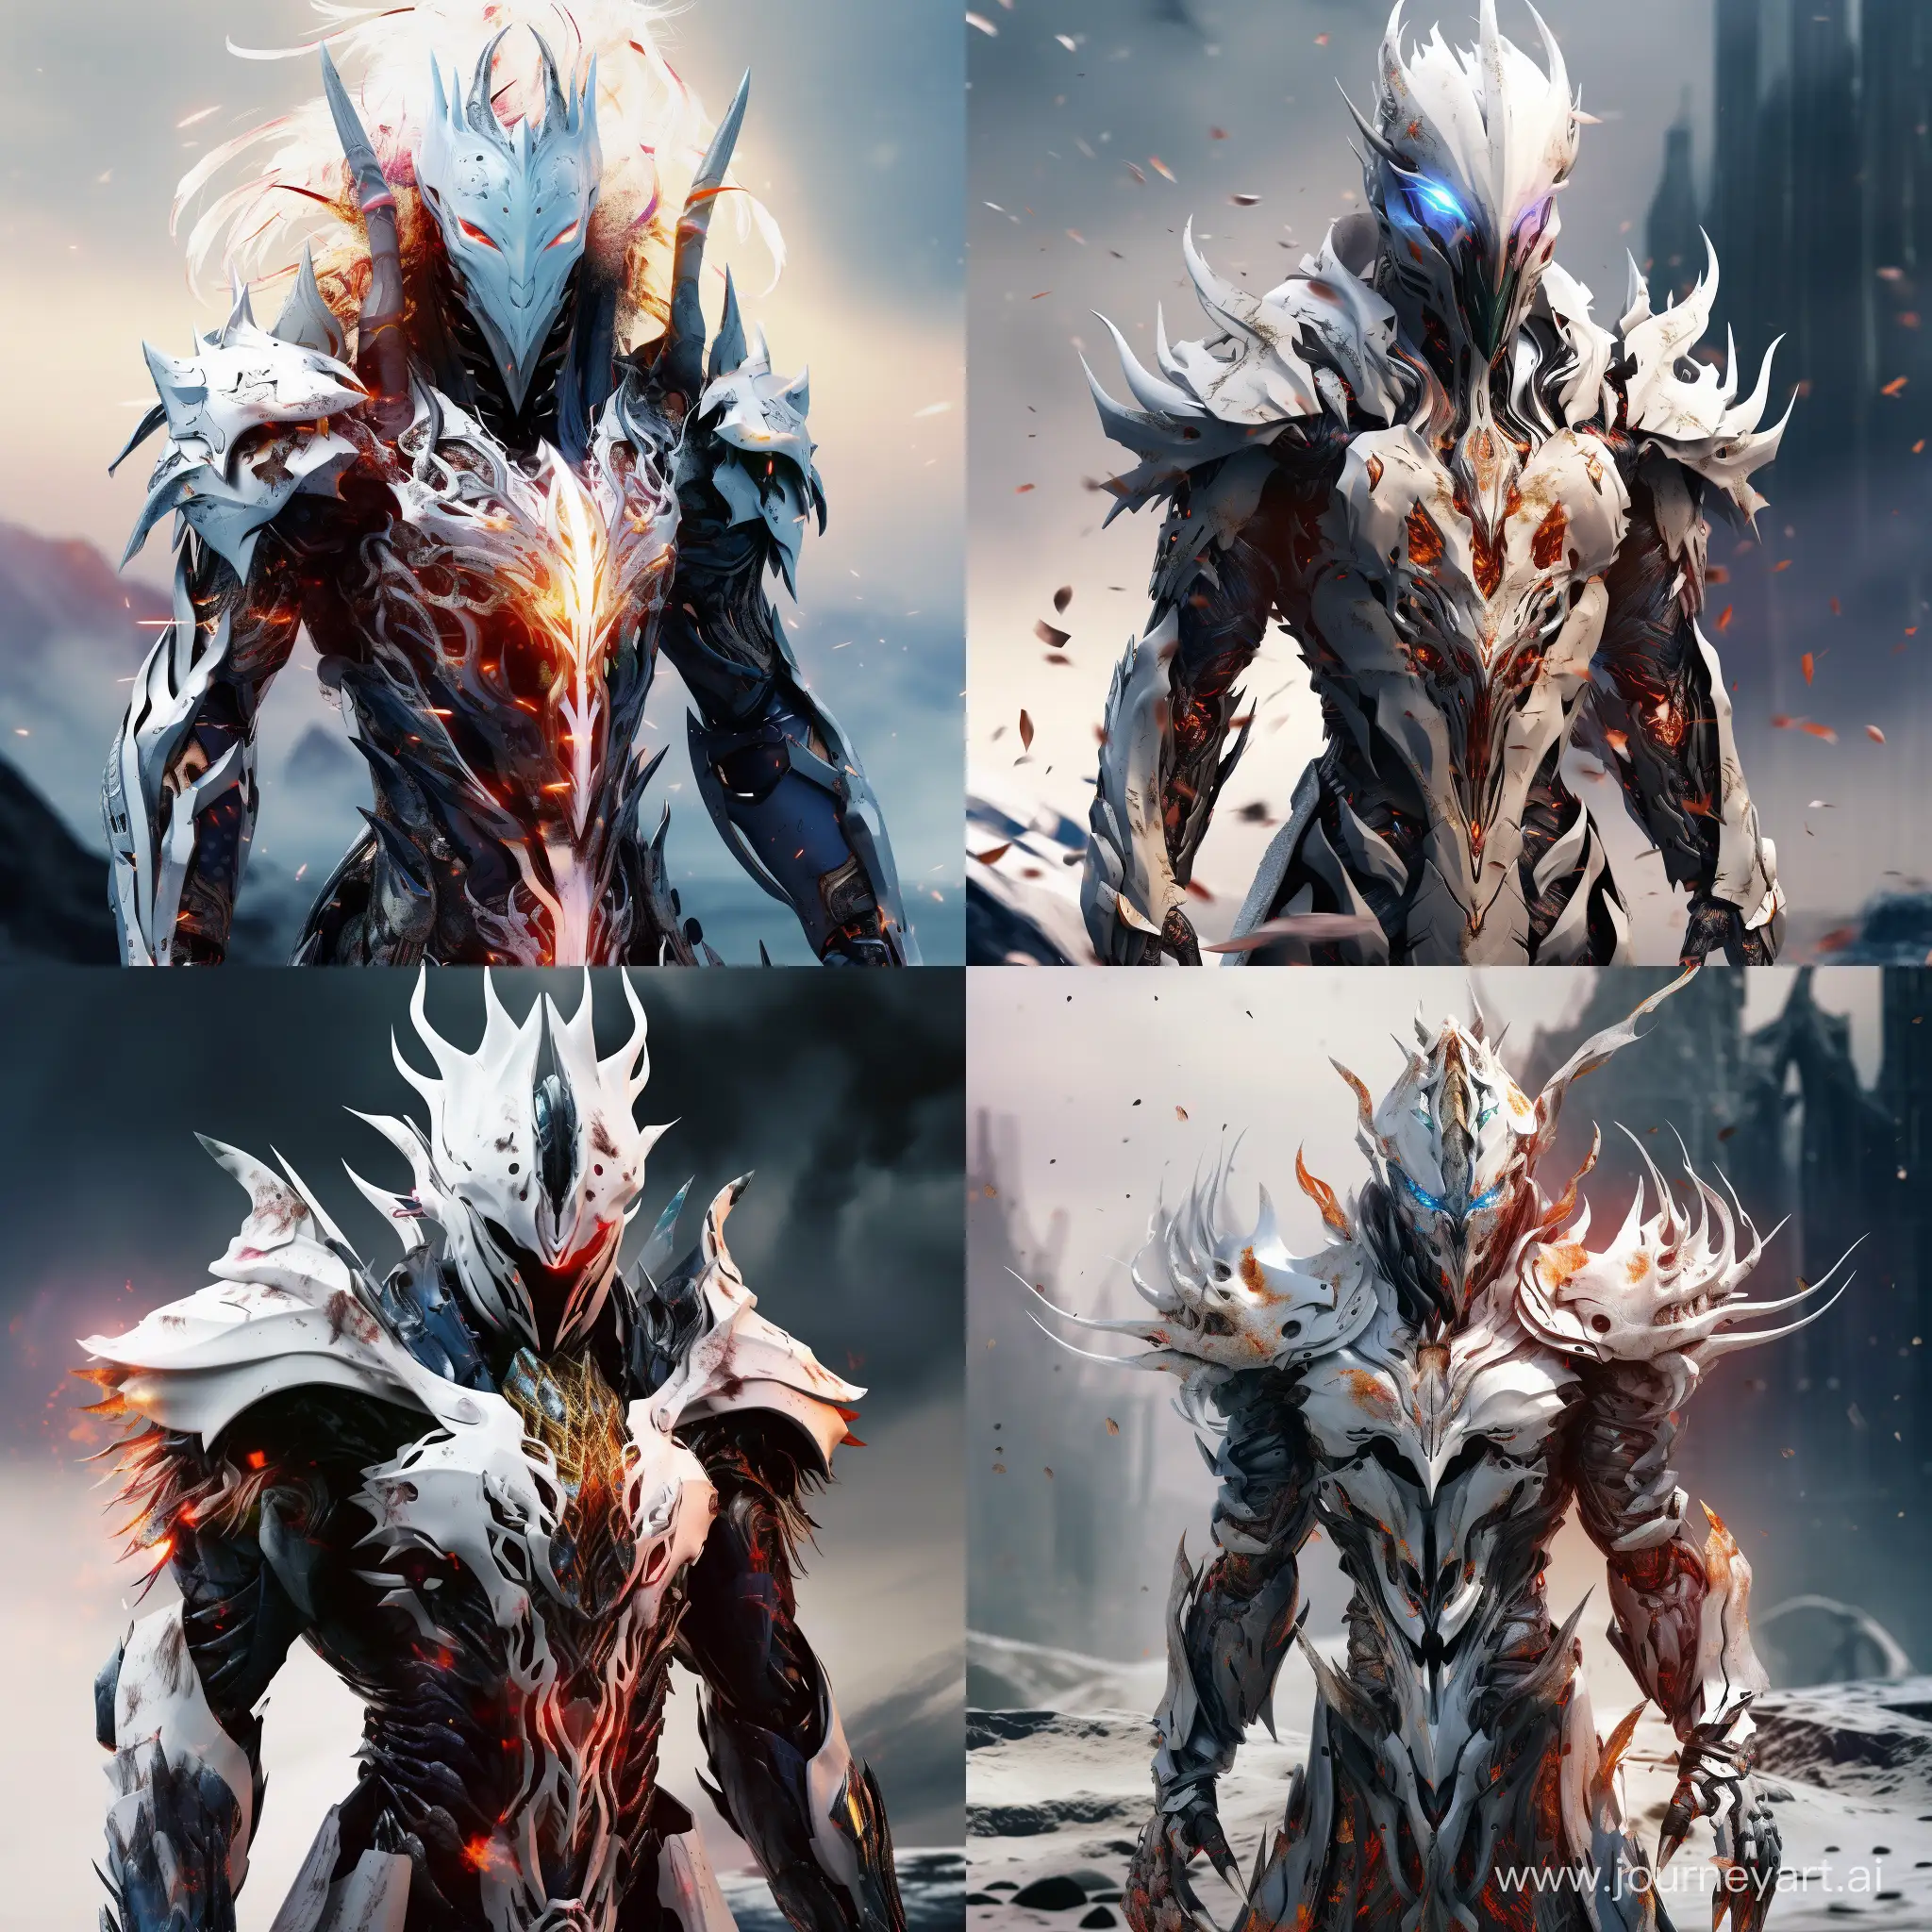 White-Knight-in-Unusual-Fantasy-Armor-Cyberpunk-Style-Abstraction